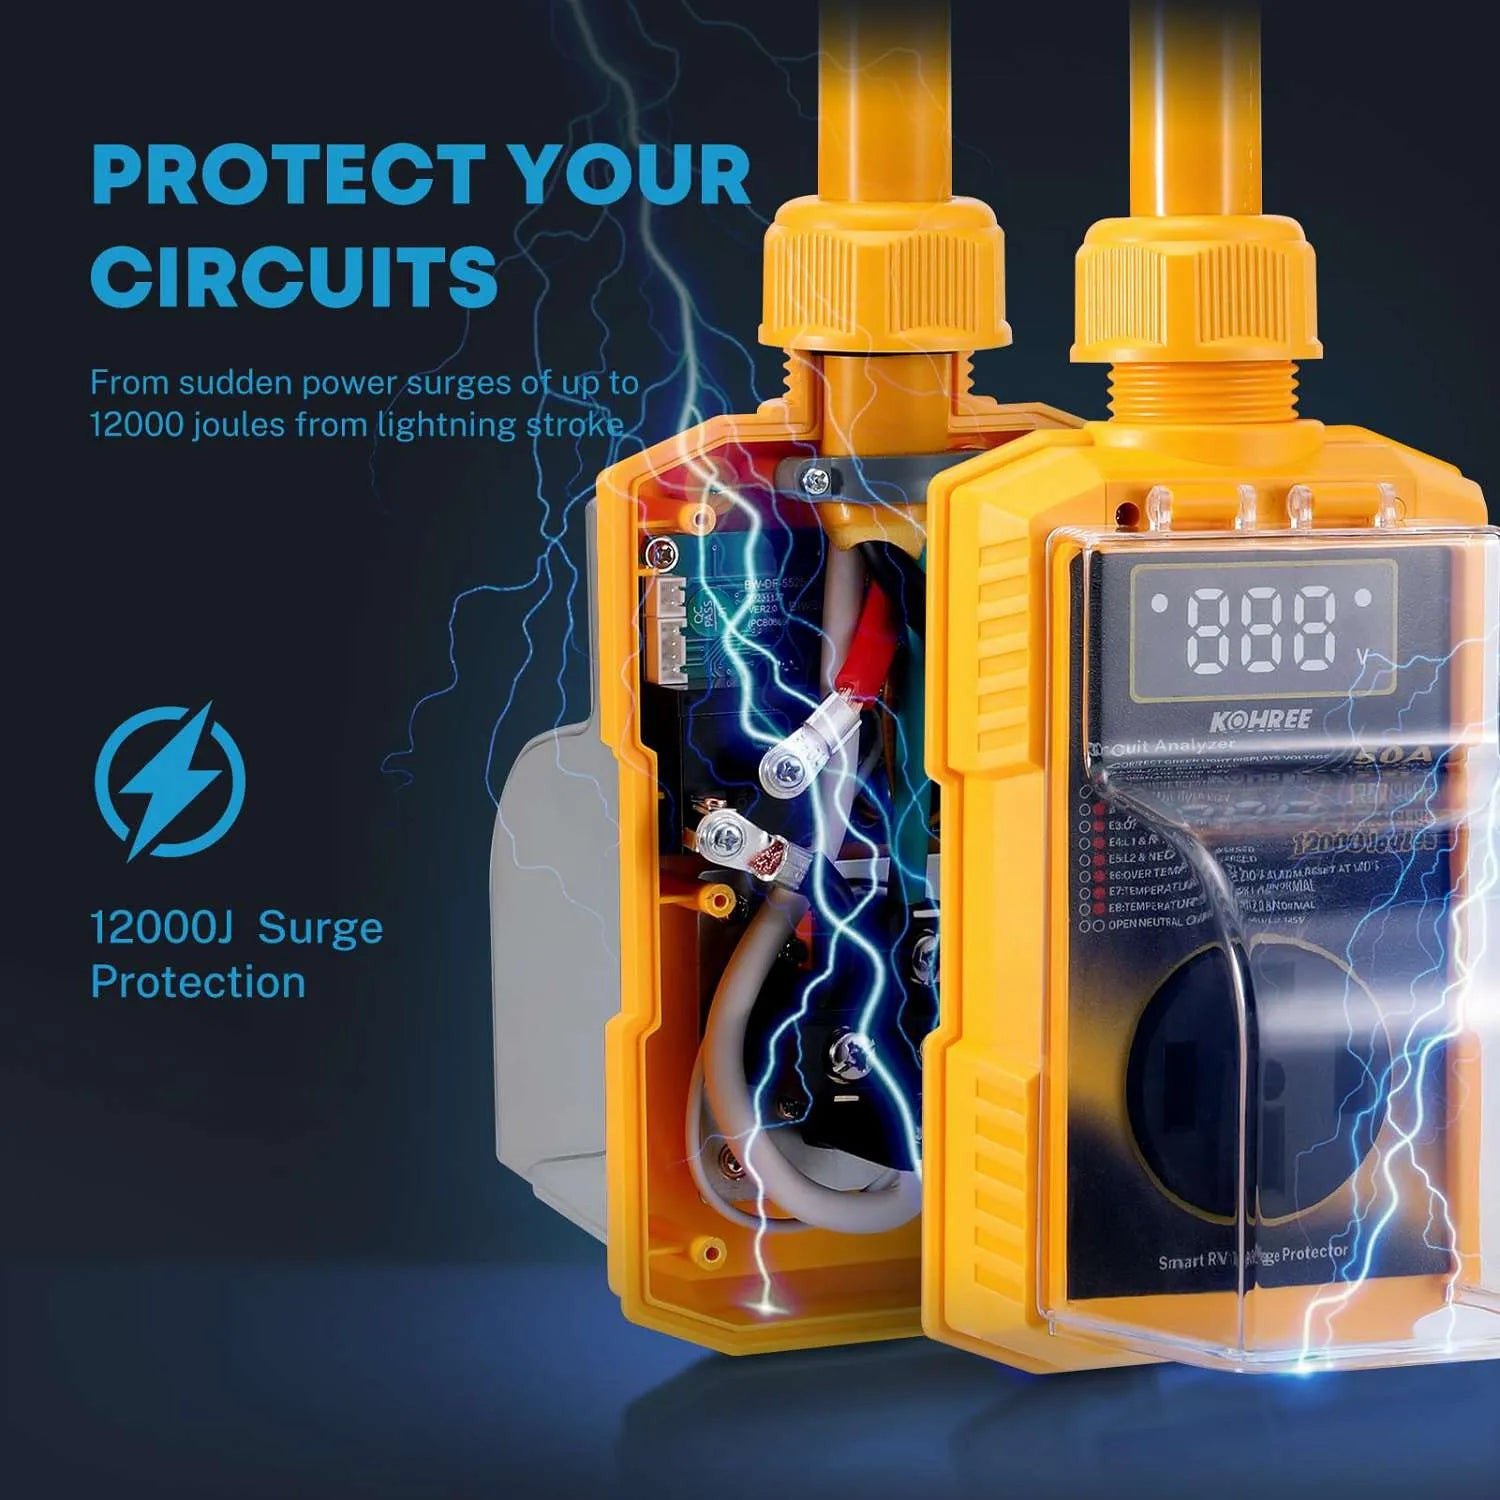 12000 joules surge protection guard